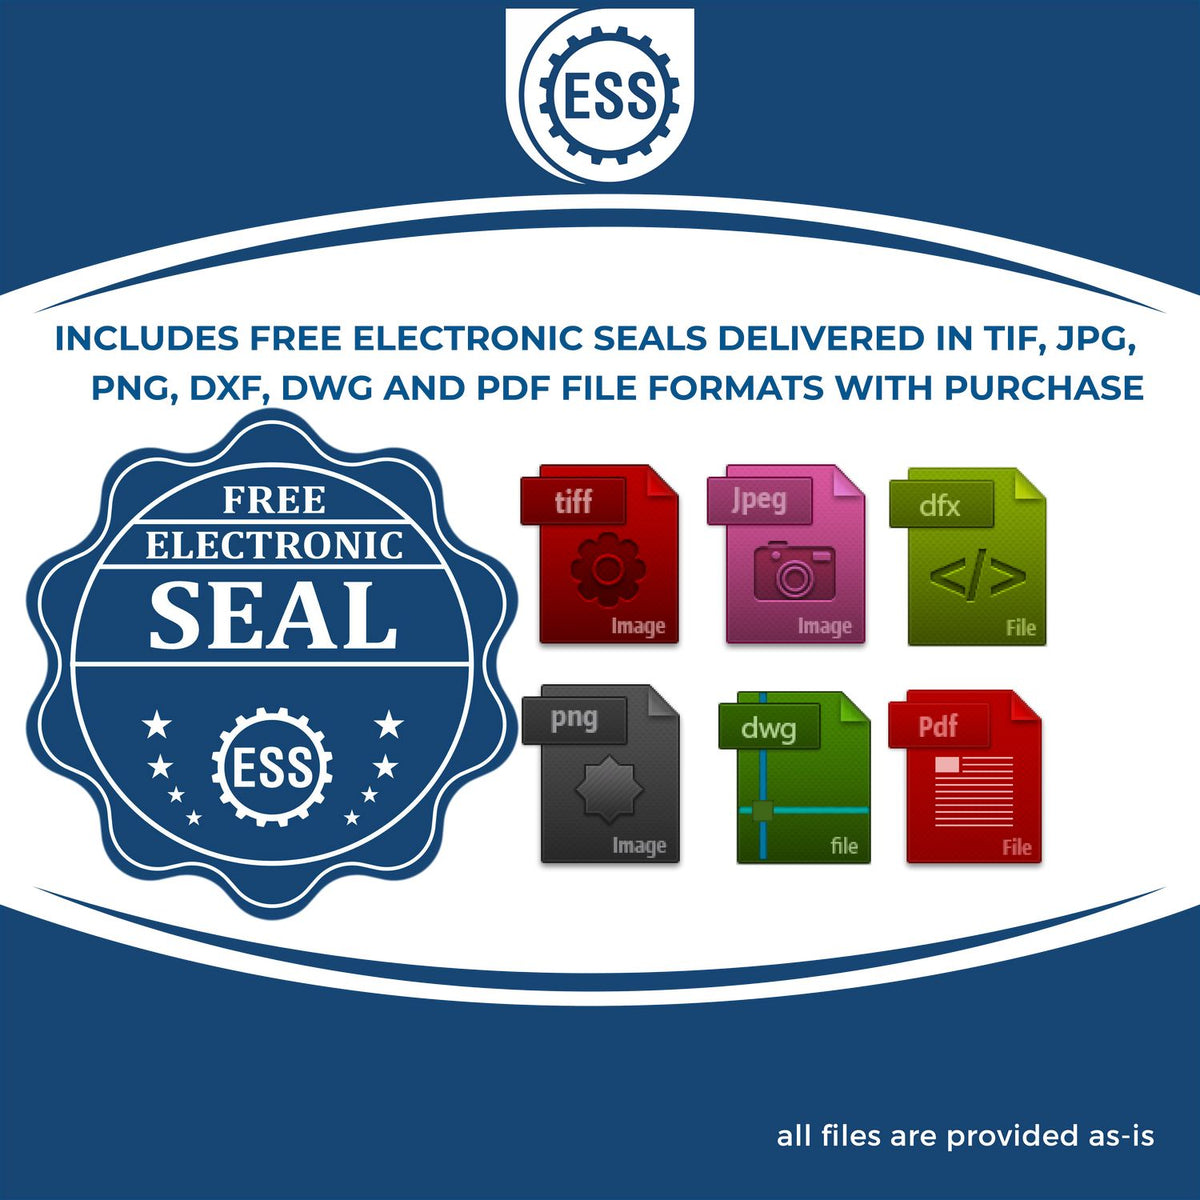 An infographic for the free electronic seal for the Premium MaxLight Pre-Inked Pennsylvania Geology Stamp illustrating the different file type icons such as DXF, DWG, TIF, JPG and PNG.